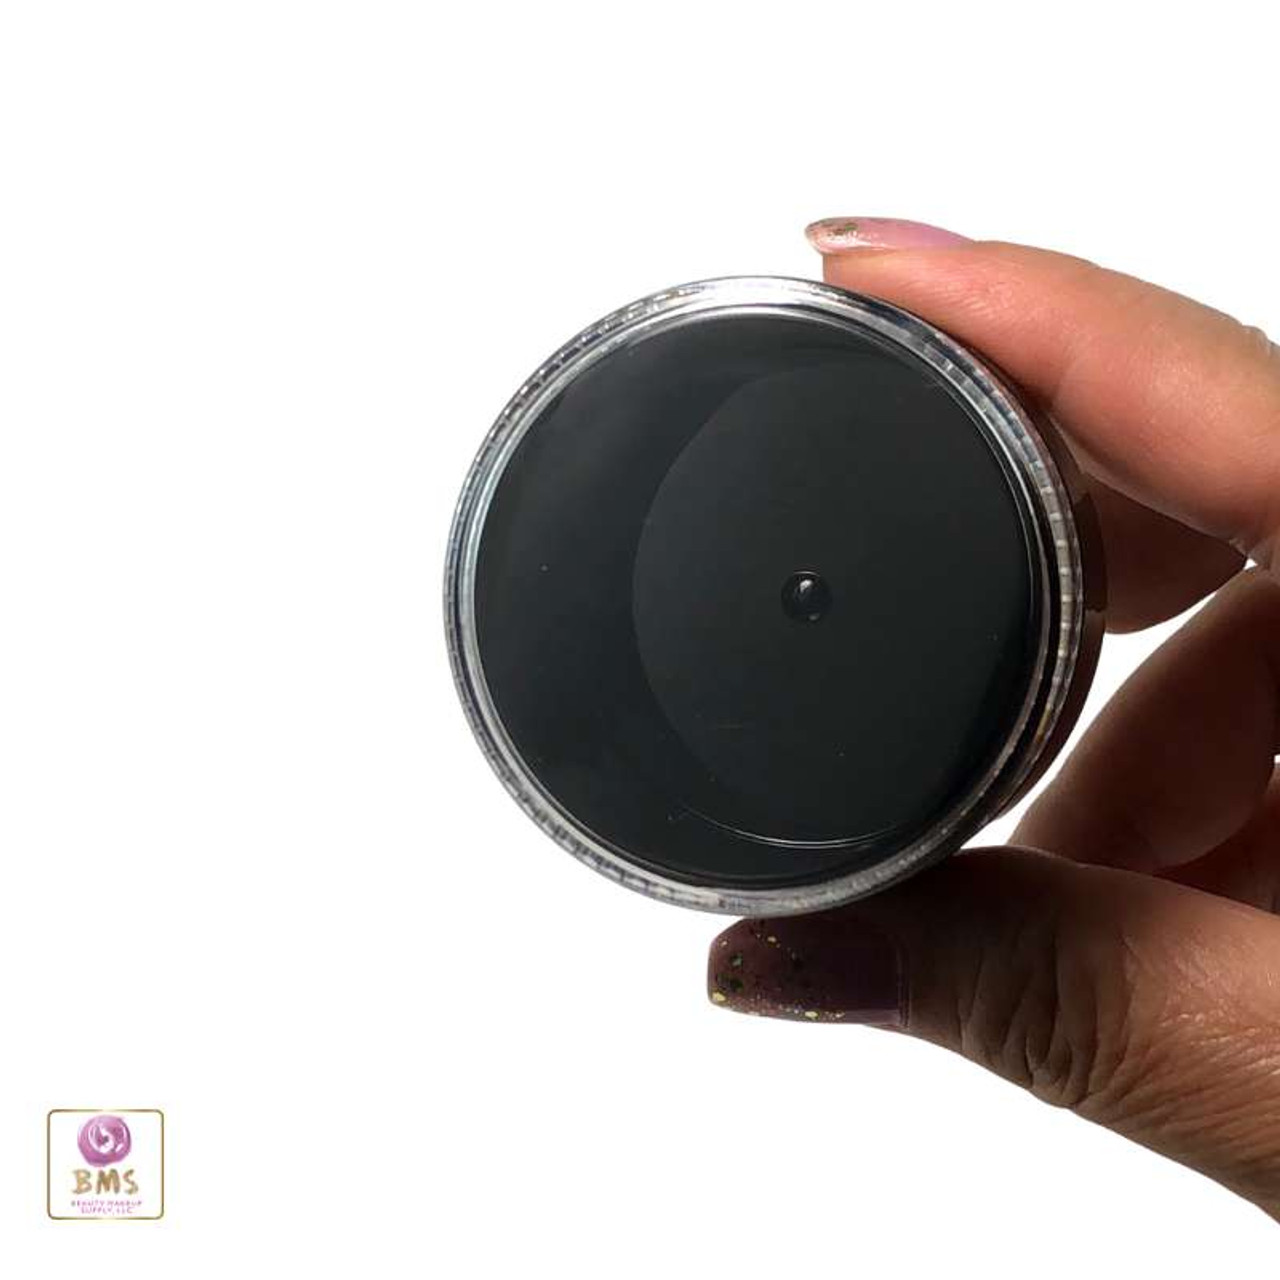 https://cdn11.bigcommerce.com/s-qd7k5gxi/images/stencil/1280x1280/products/498/7208/Cosmetic-Sifter-Jars-Plastic-Black-Beauty-Containers-with-Lids-30-Gram-Black-Clear-Lid-Beauty-Makeup-Supply_6084__99420.1661390985.jpg?c=2?imbypass=on